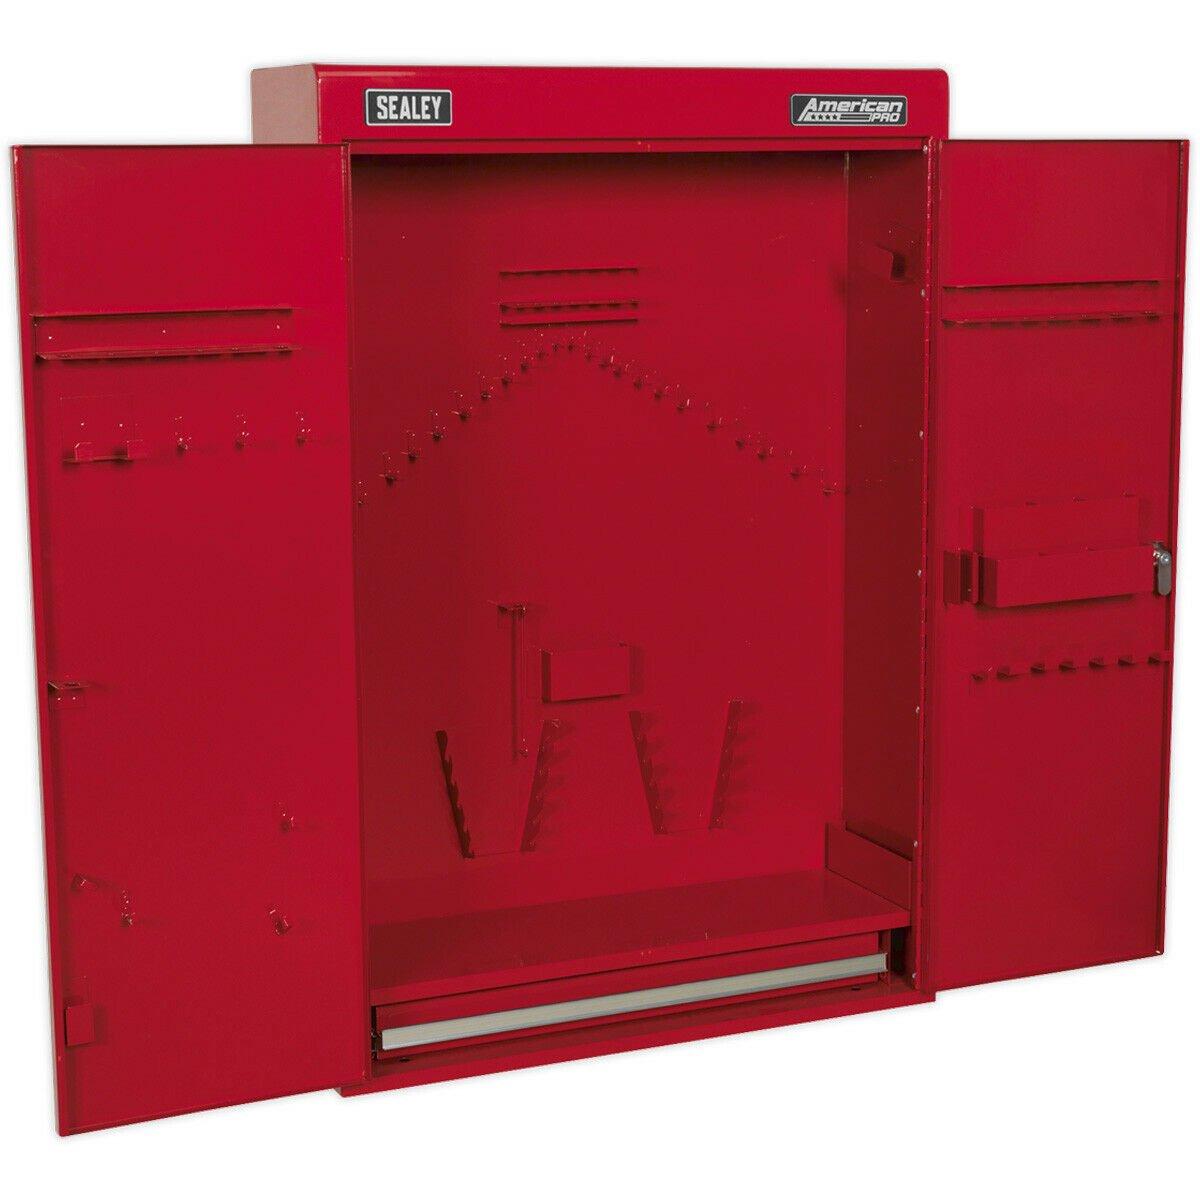 615 x 195 x 900 Wall Mounted 1 Drawer Tool Cabinet - RED - Lockable Storage Unit